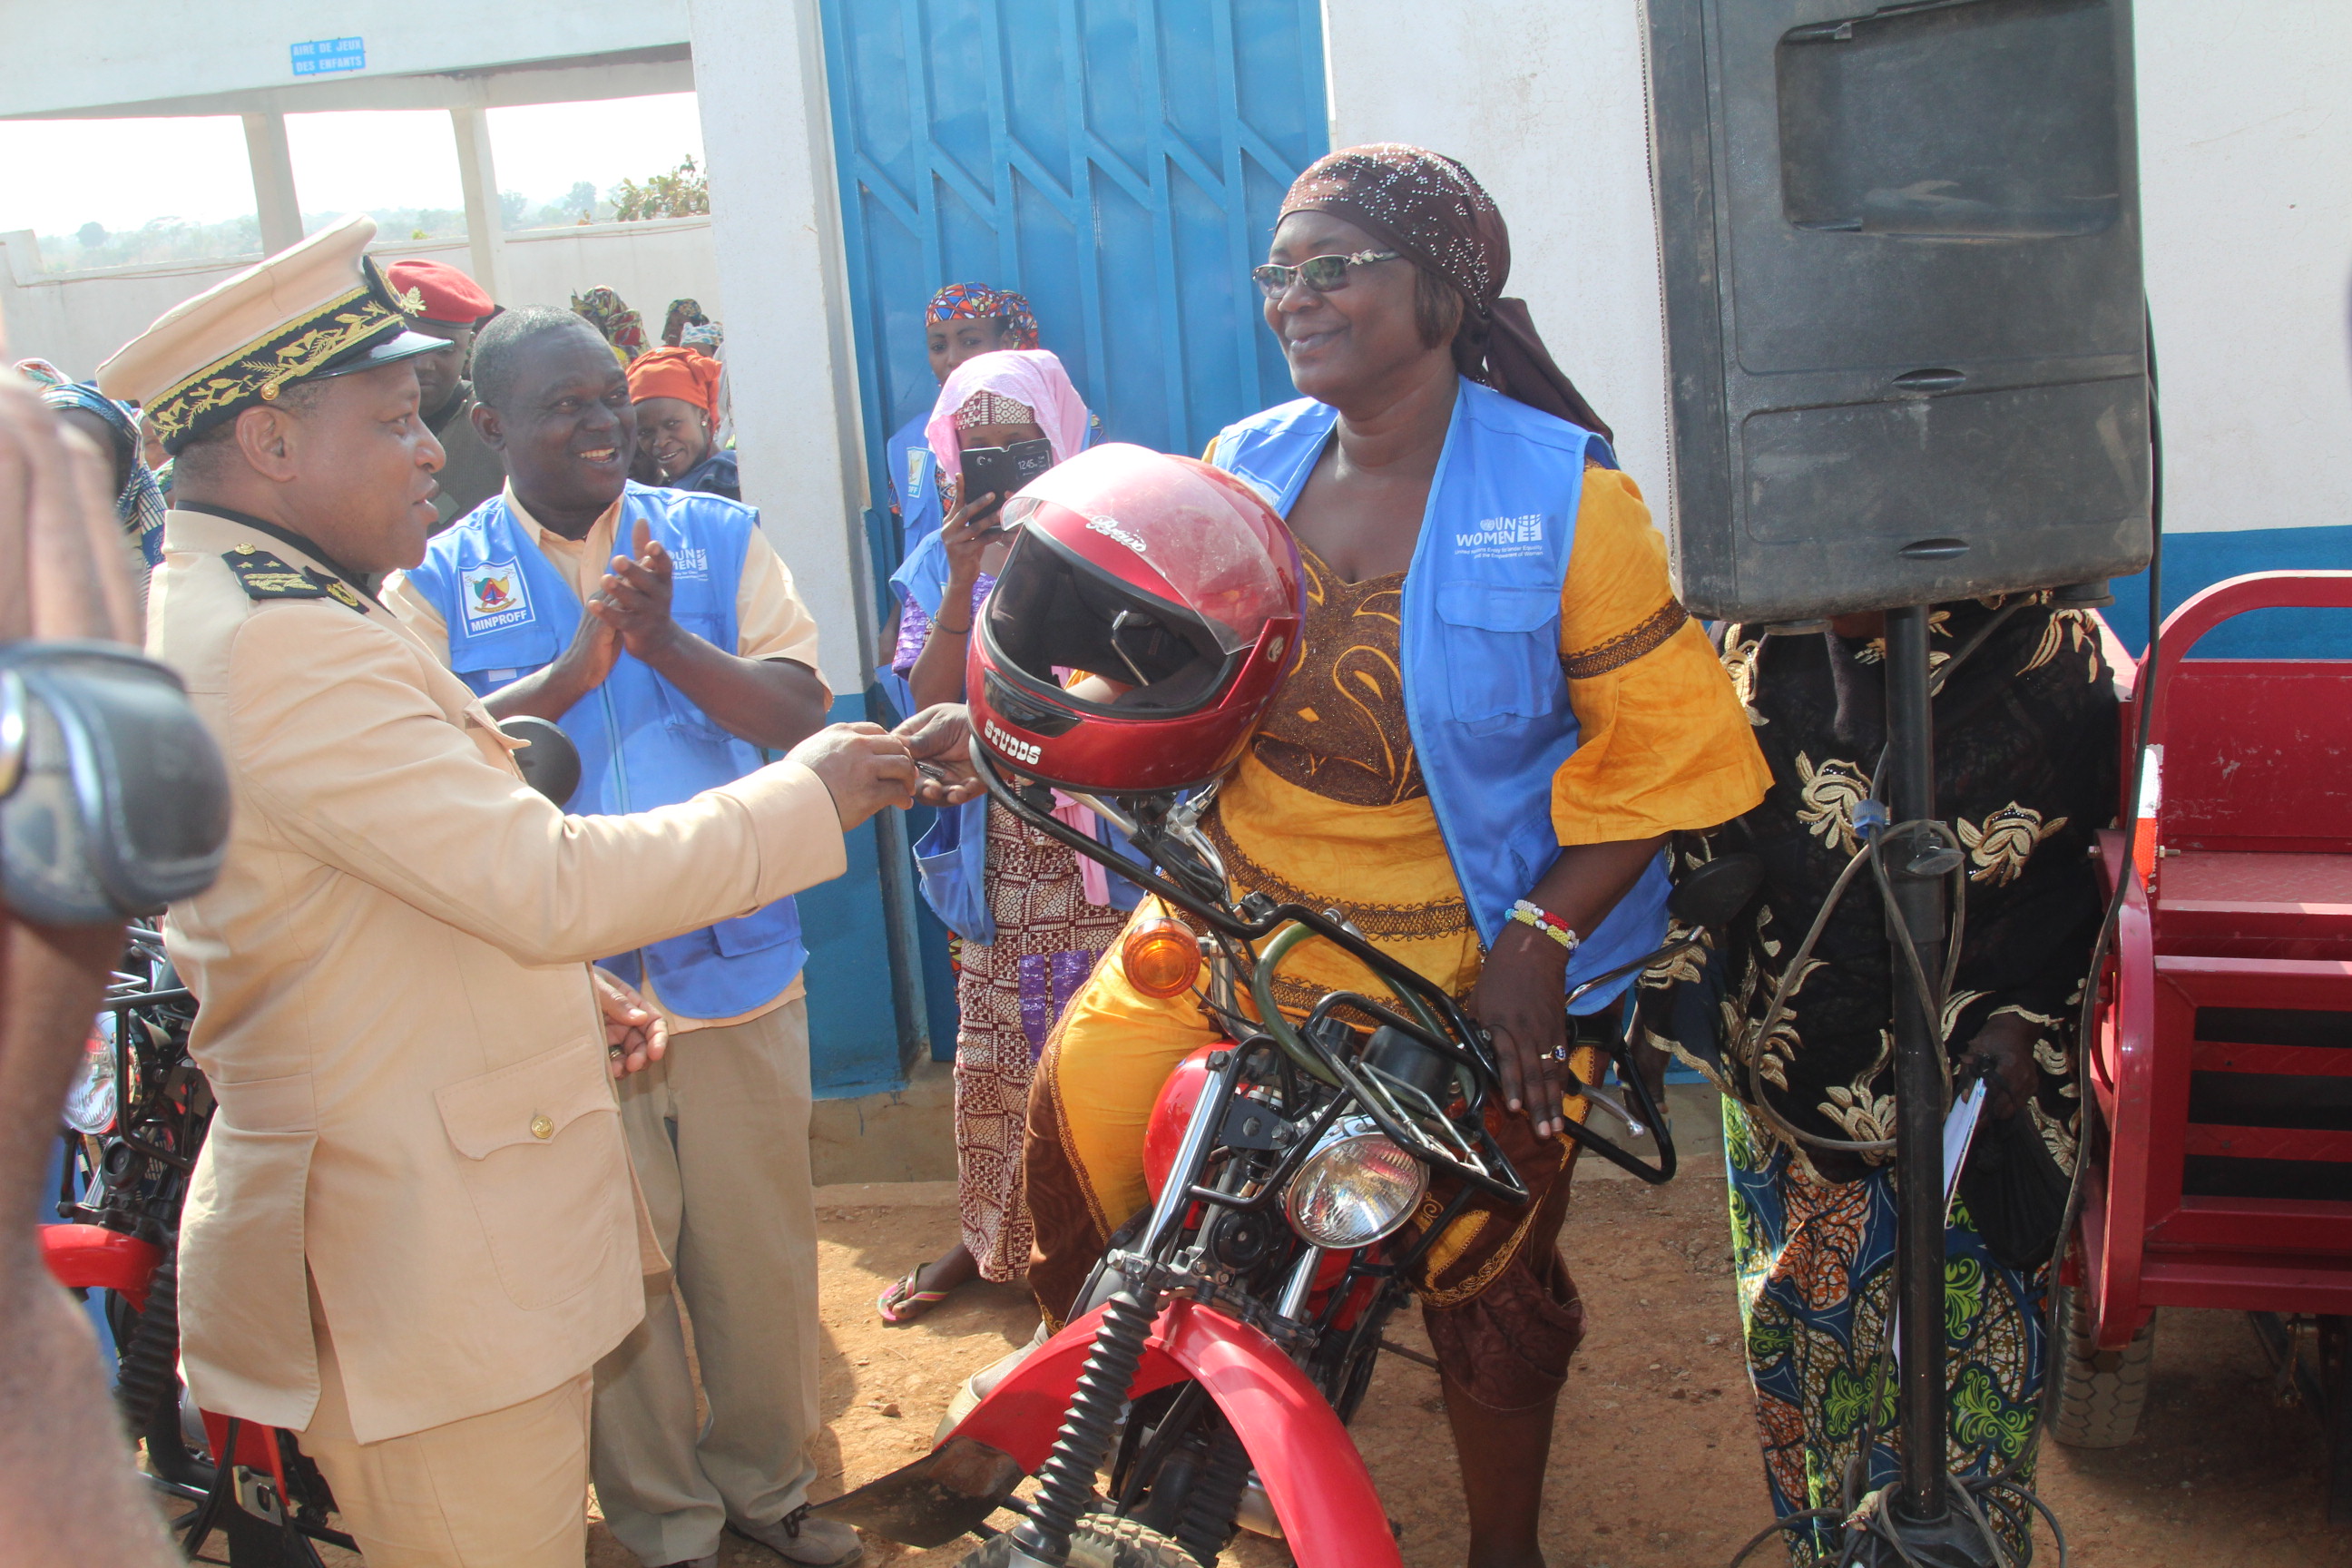 Worker at WCS receives keys of Motocycle from Divisional Officer with joy. Photo credit: Fajong Joseph-UN Women